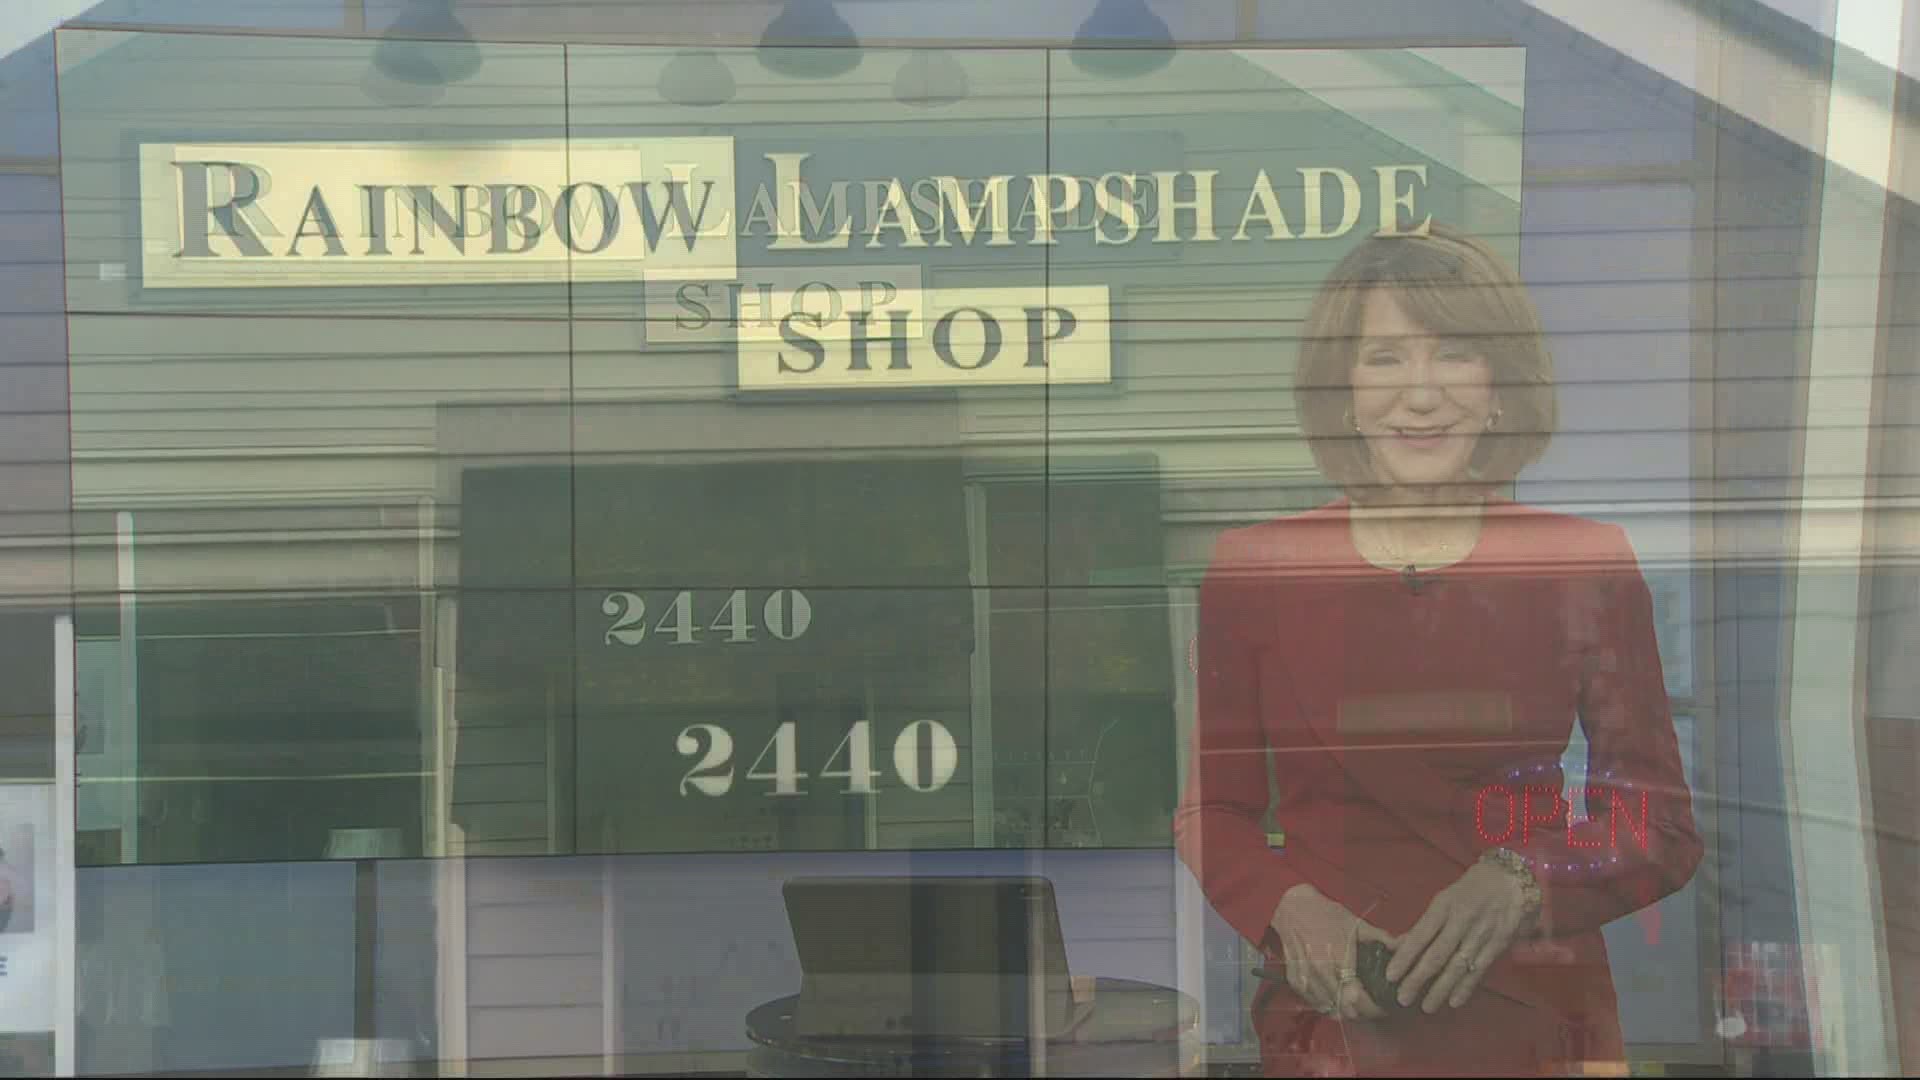 A North Portland business has been helping people keep the lights on for nearly 70 years, but the Rainbow Lampshade Shop is closing so the owners can retire.